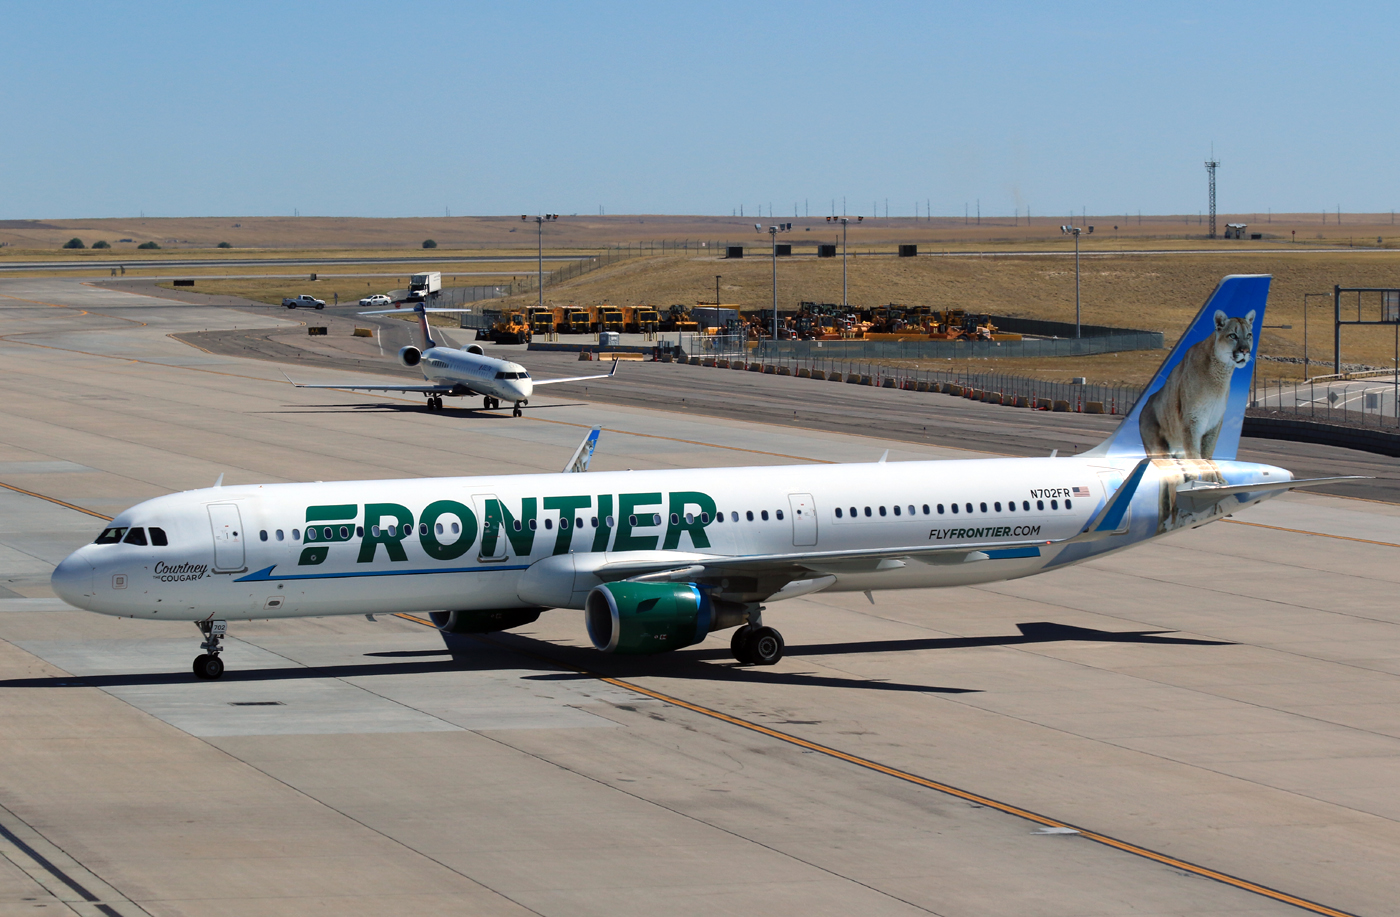 Frontier Airlines Airbus A321 211WL N702FR Courtney the Cougar